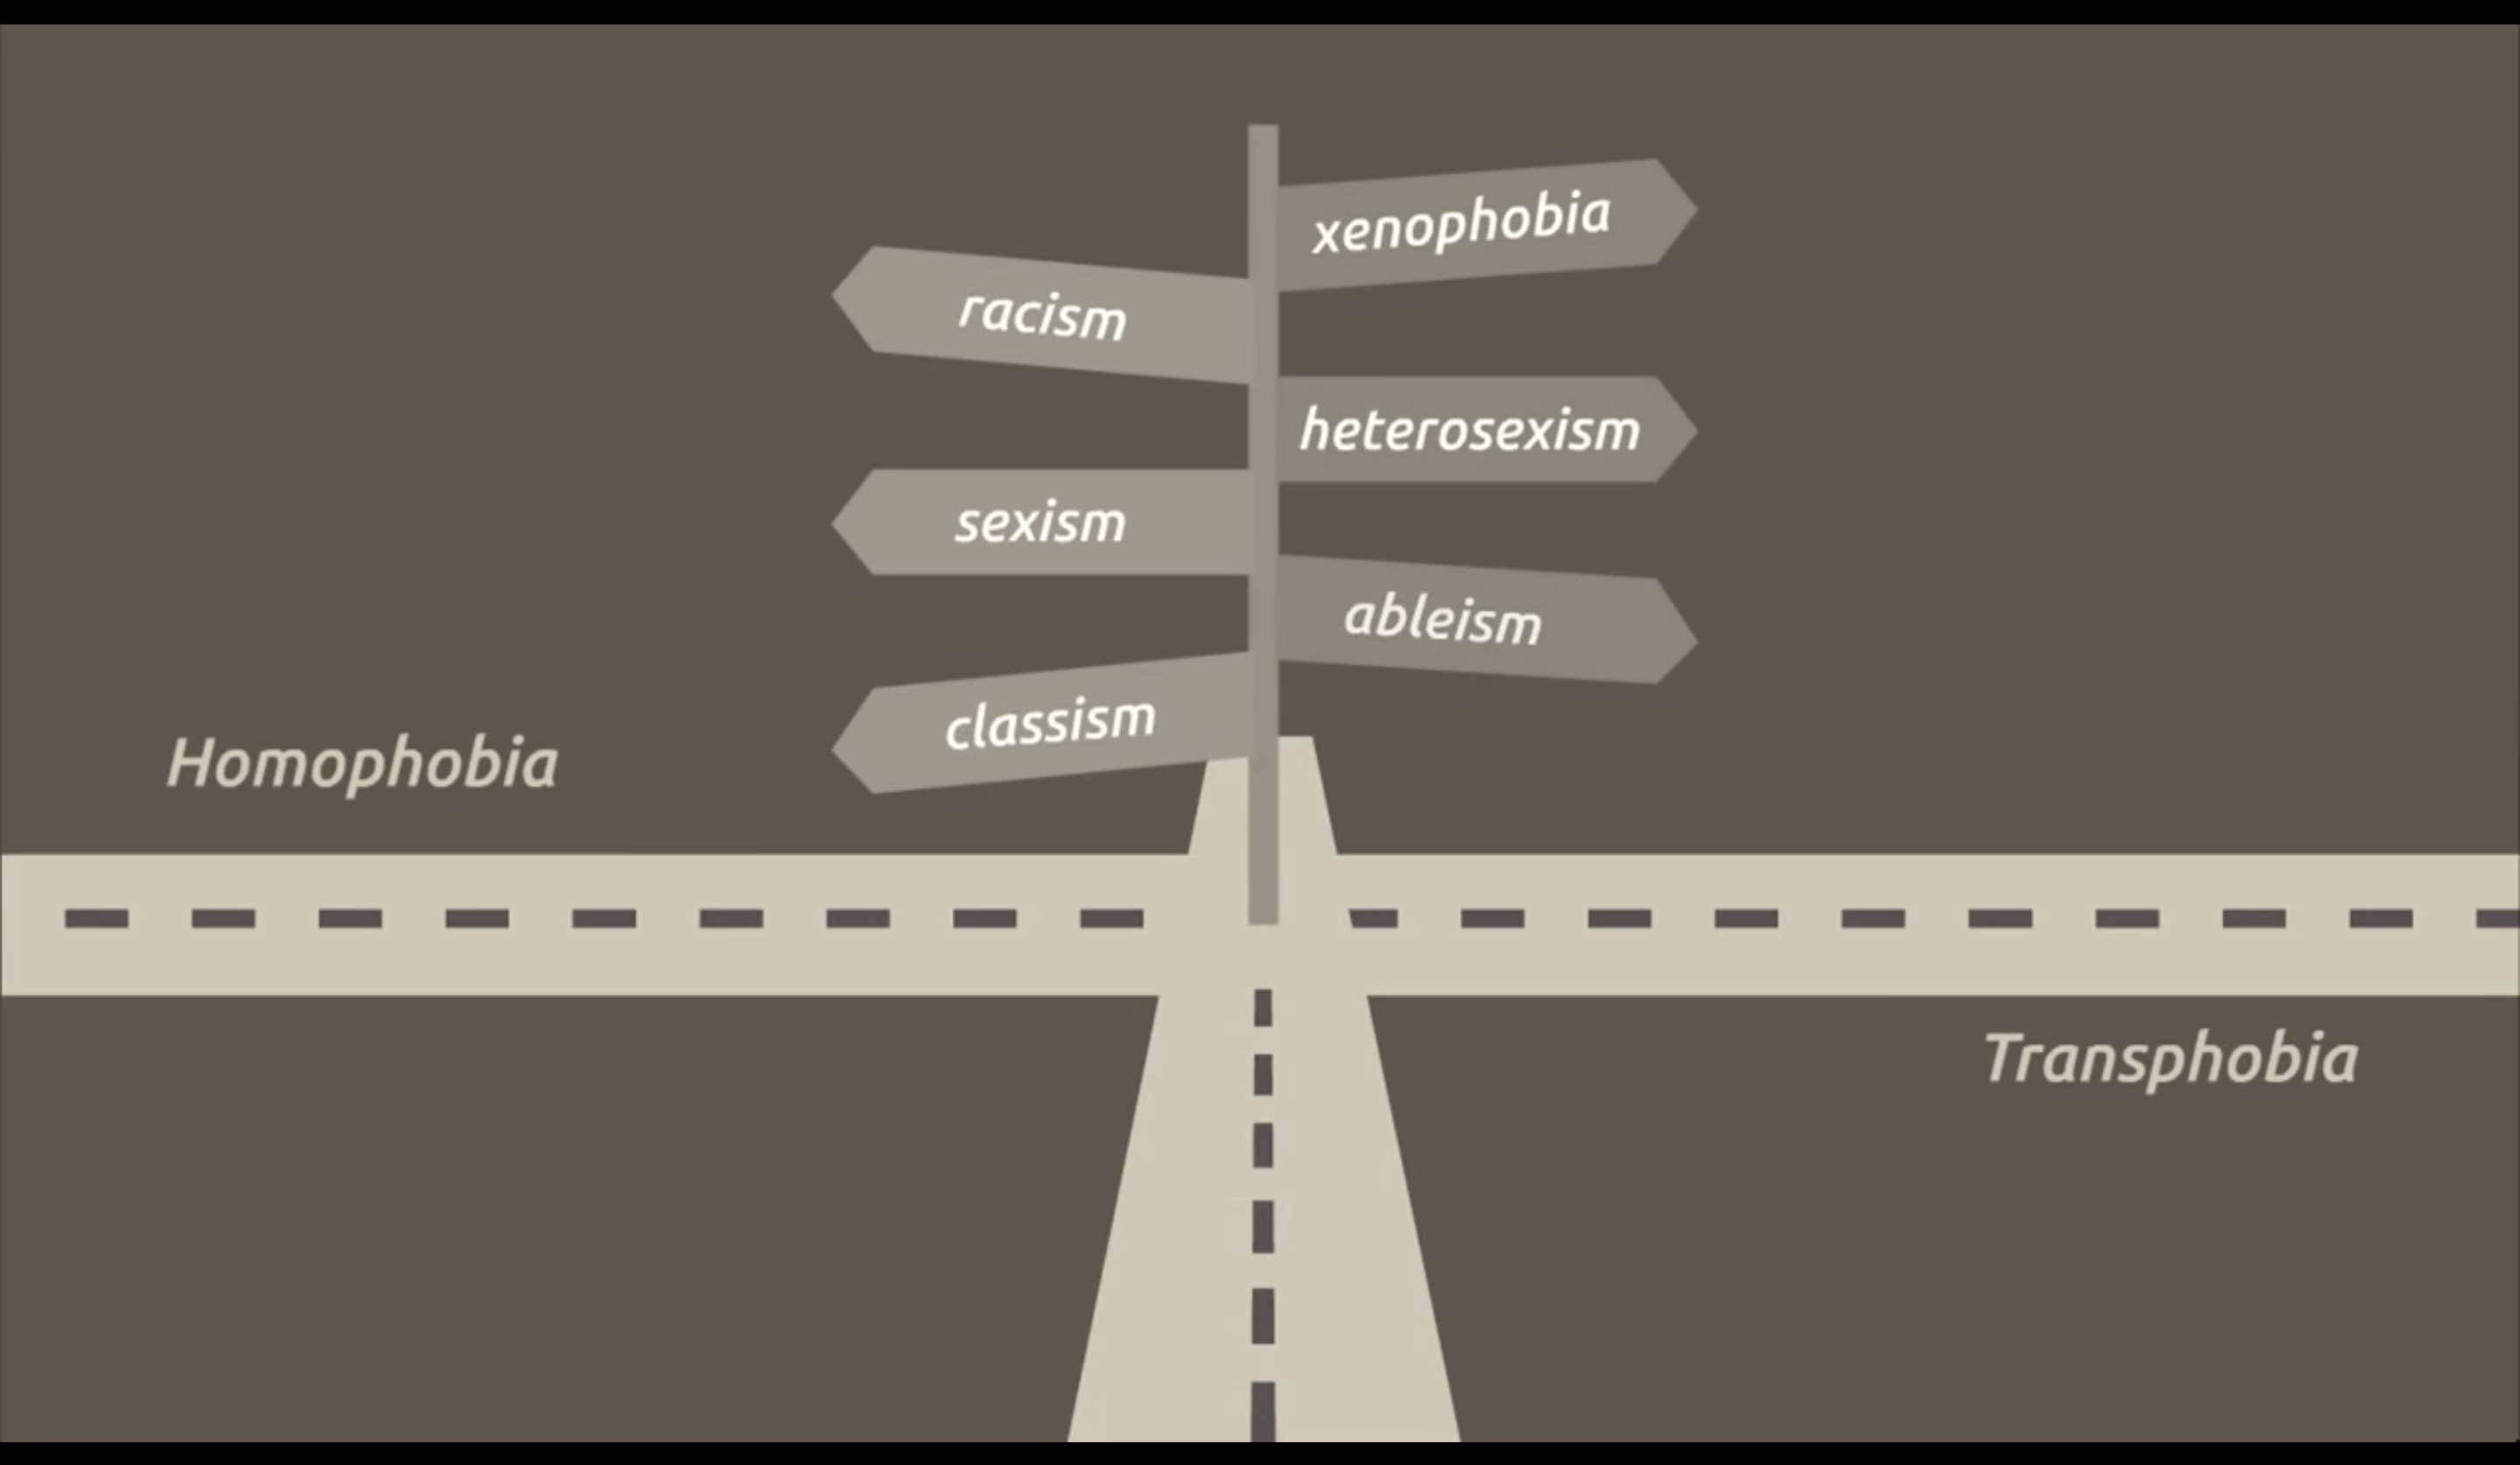 Intersectionality as a Crossroads